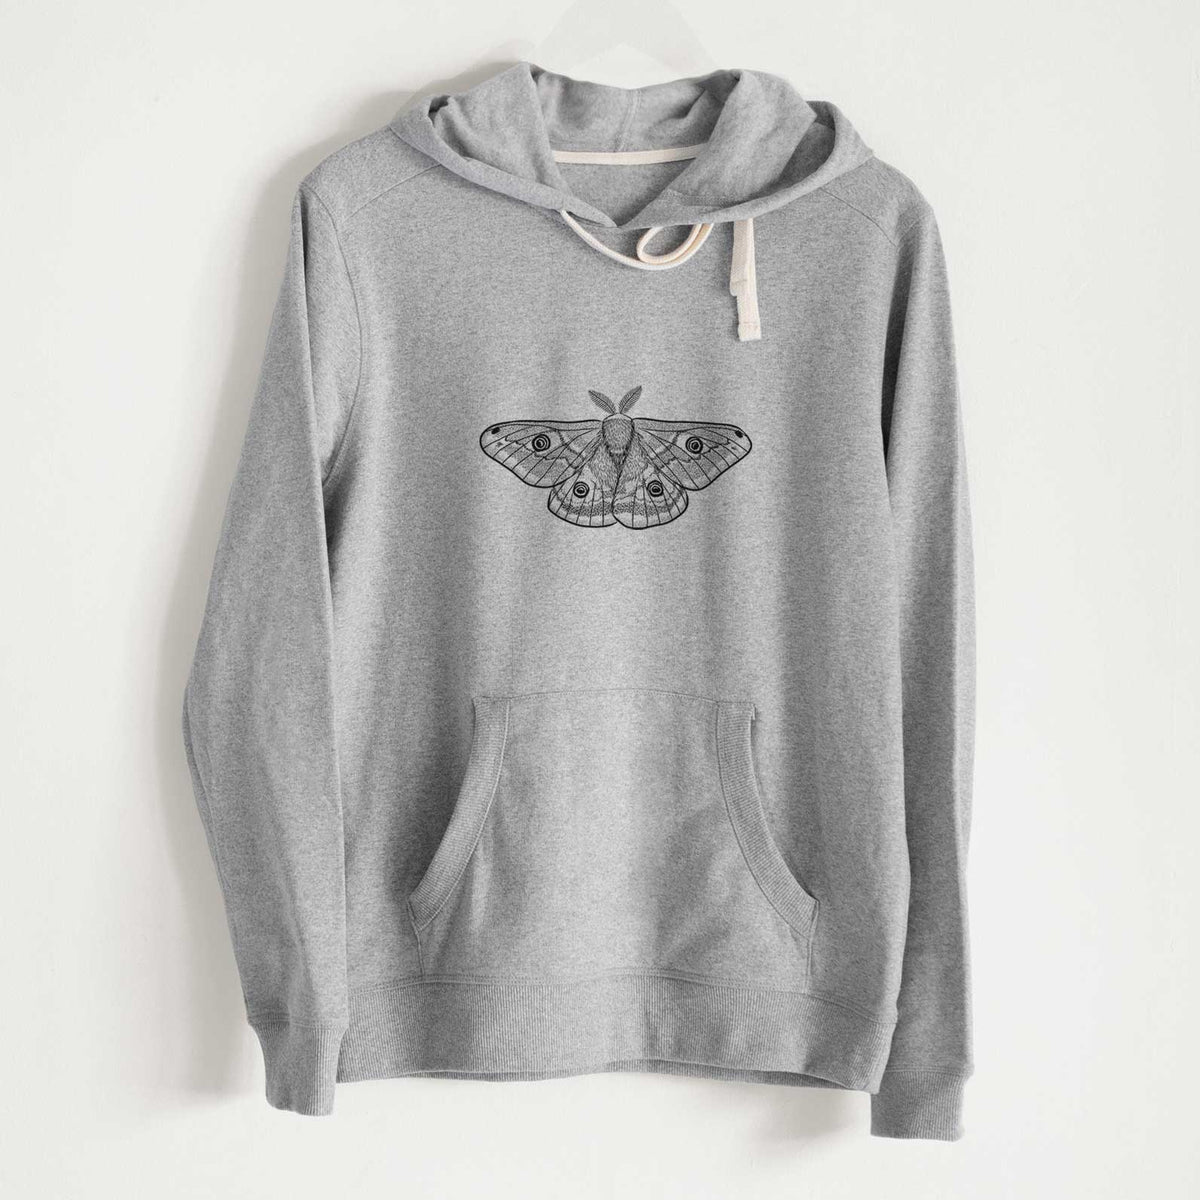 Saturnia pavonia - Small Emperor Moth - Unisex Recycled Hoodie - CLOSEOUT - FINAL SALE